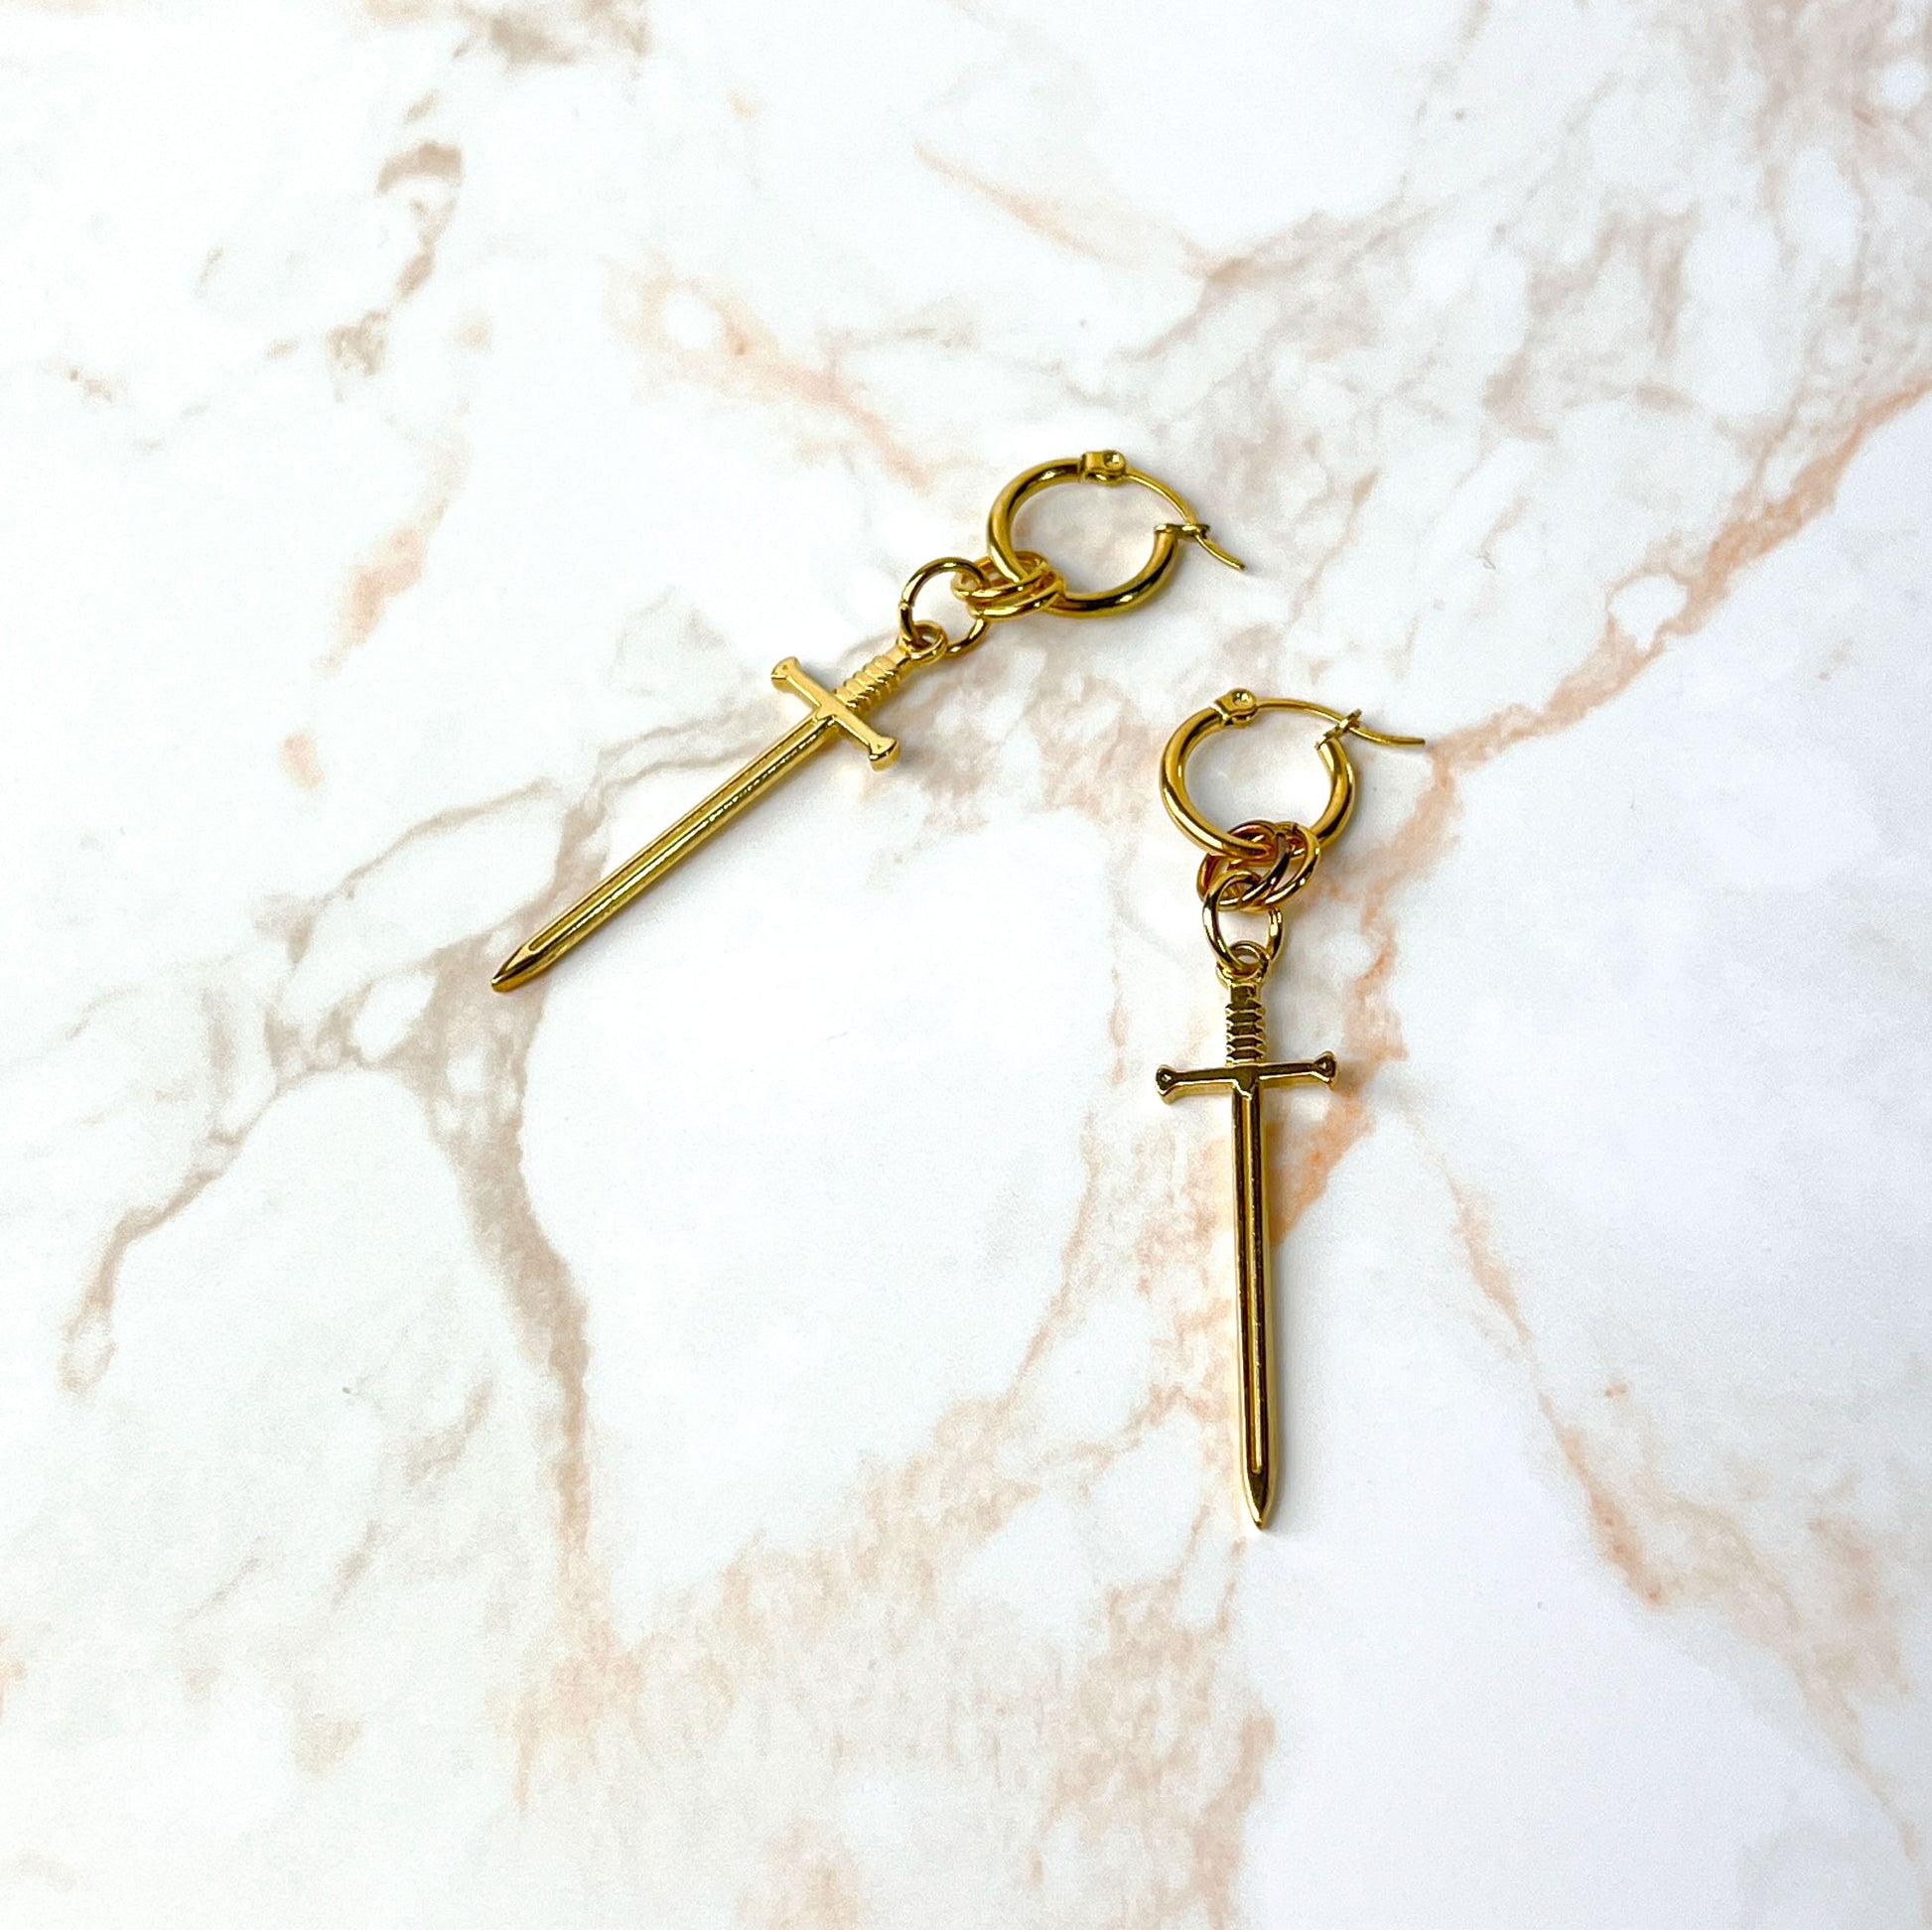 Gold hoop sword earrings, fantasy jewelry, stainless steel and 18k gold plated Baguette Magick